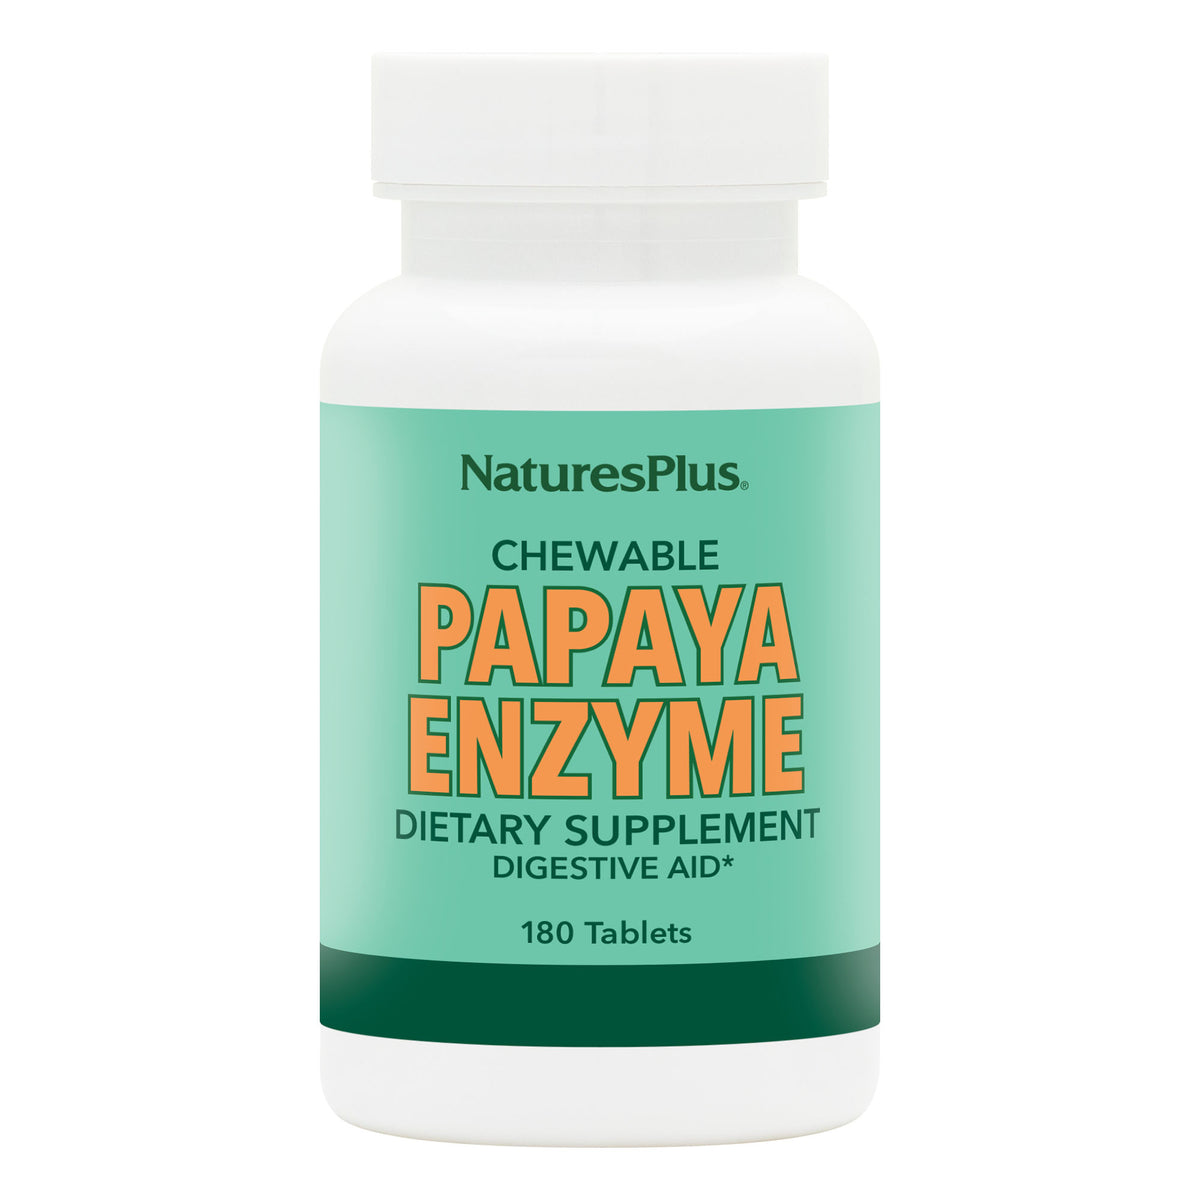 product image of Papaya Enzyme Chewables containing 180 Count